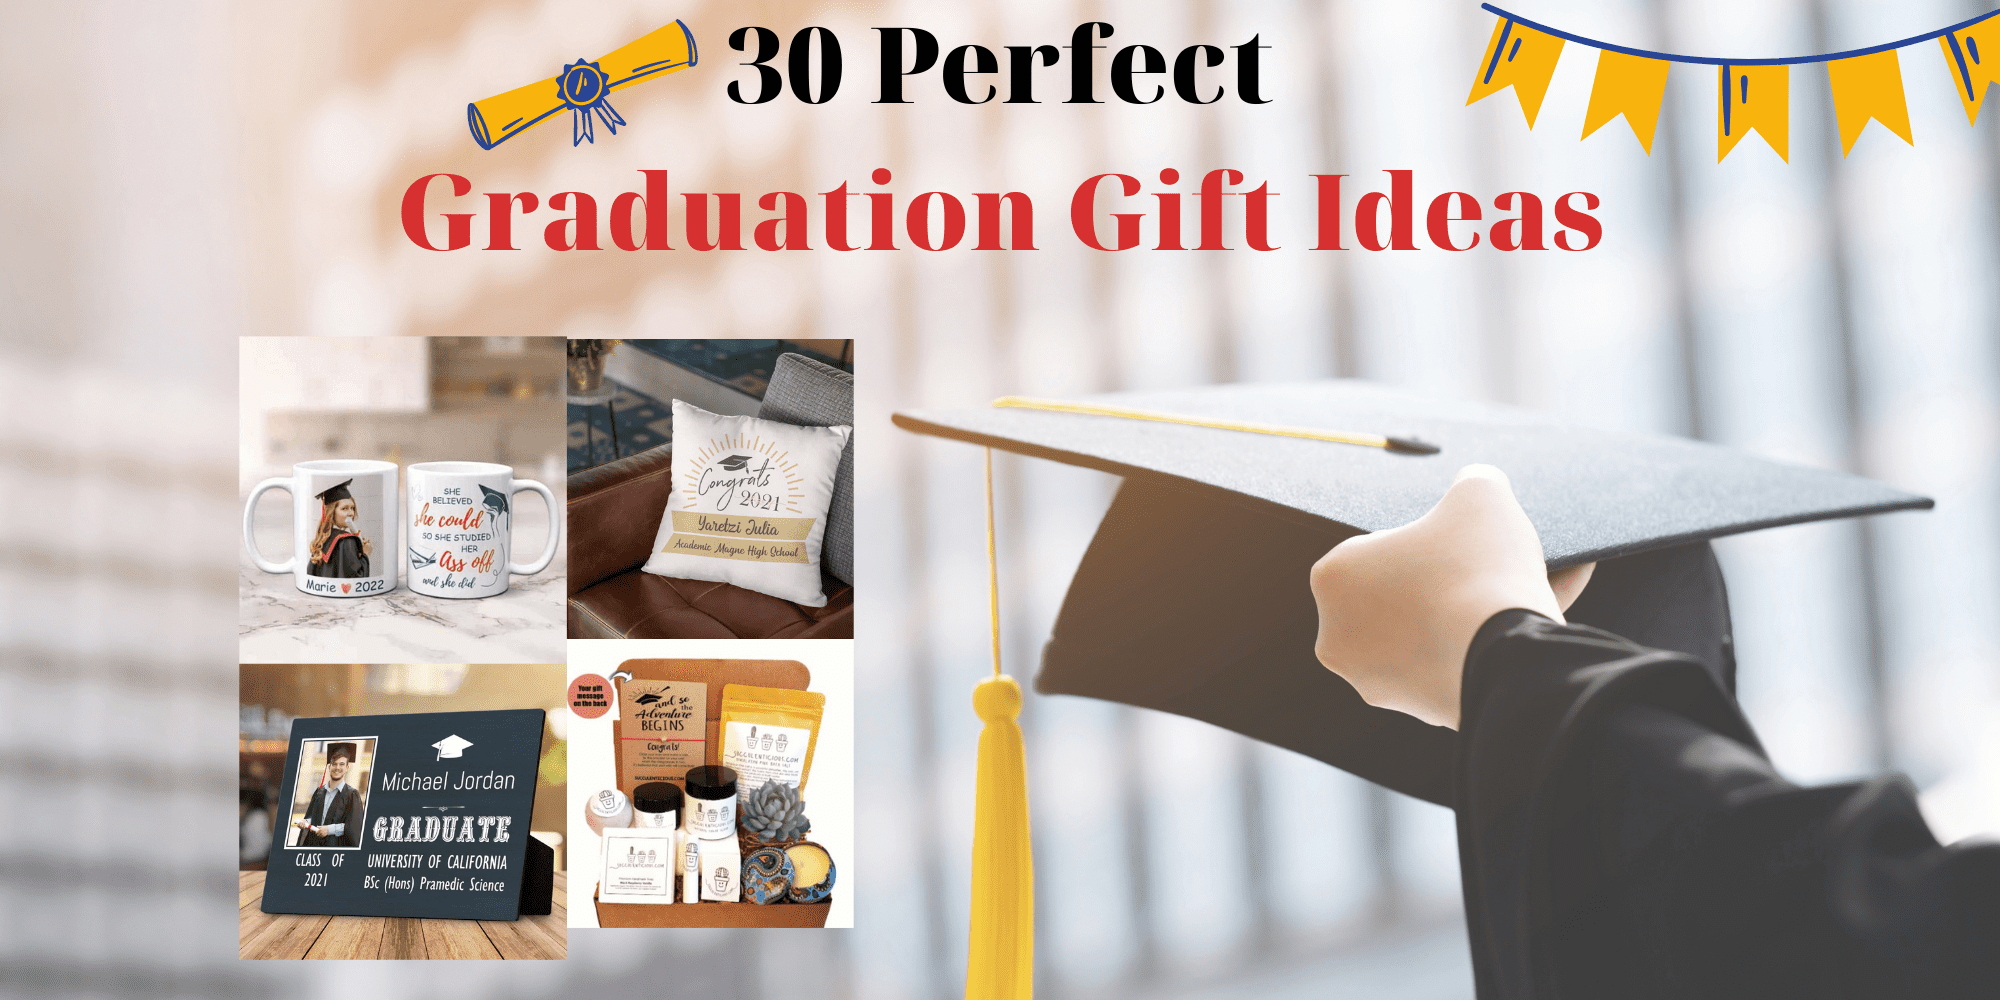 30 Perfect Graduation Gift Ideas for the Class of 2022